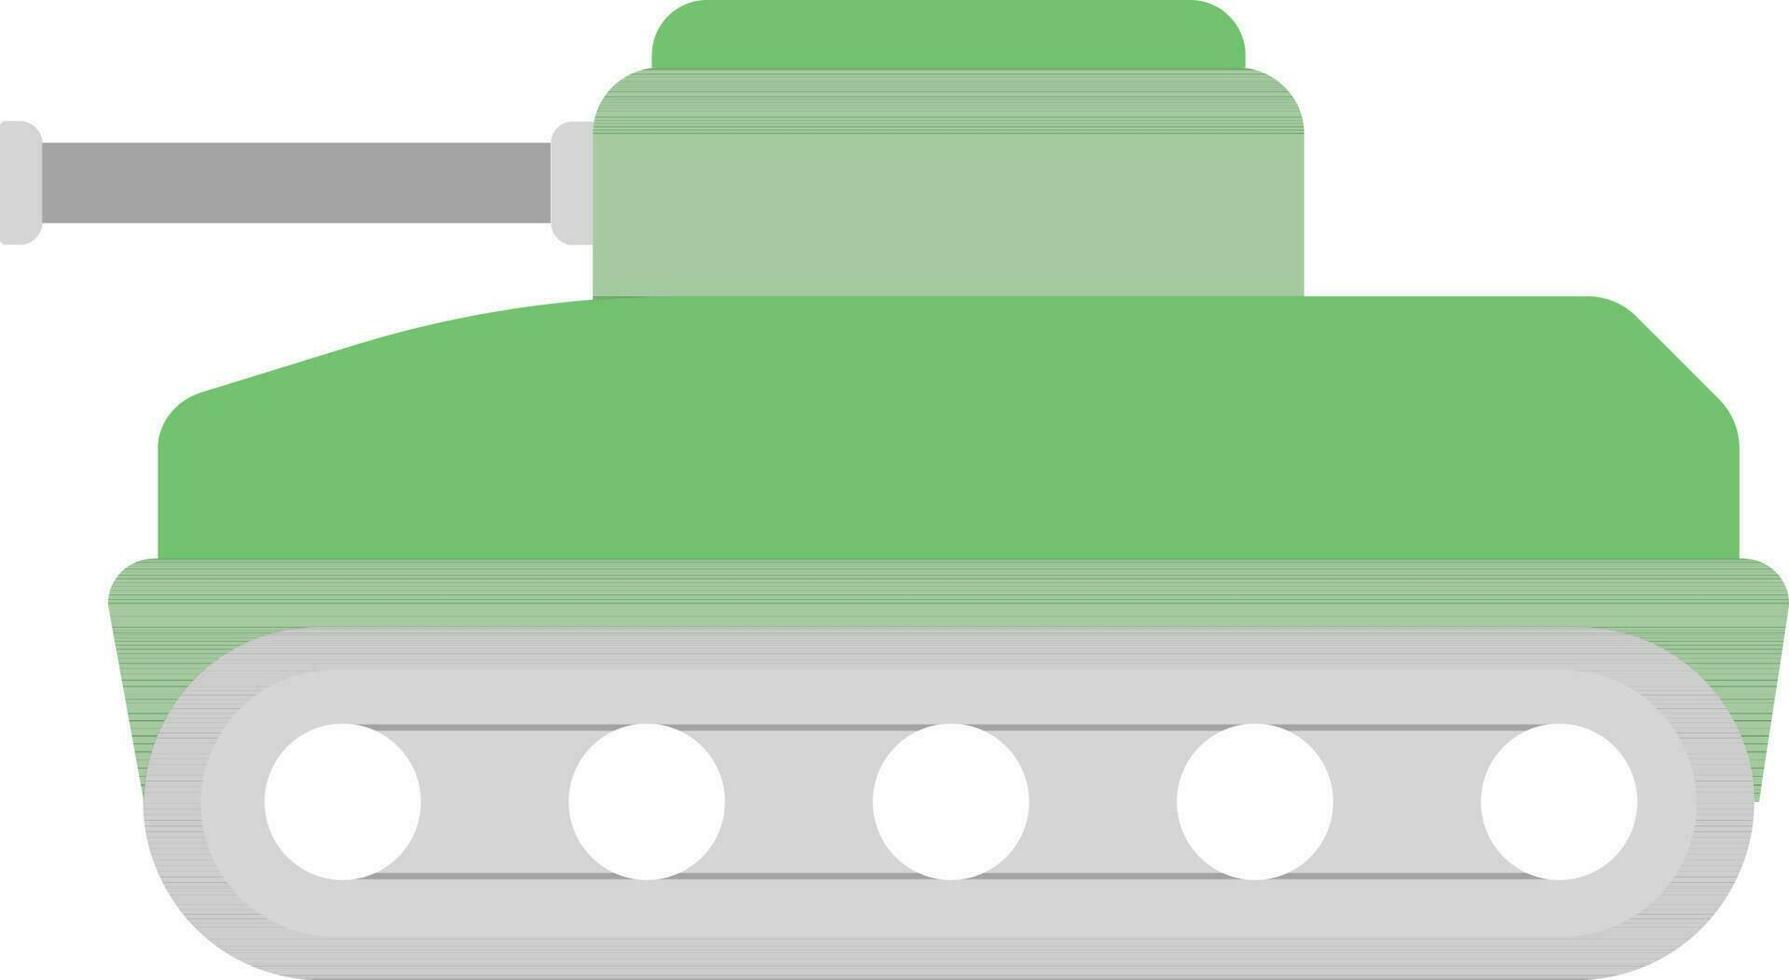 Tank Icon In Green And Gray Color. vector